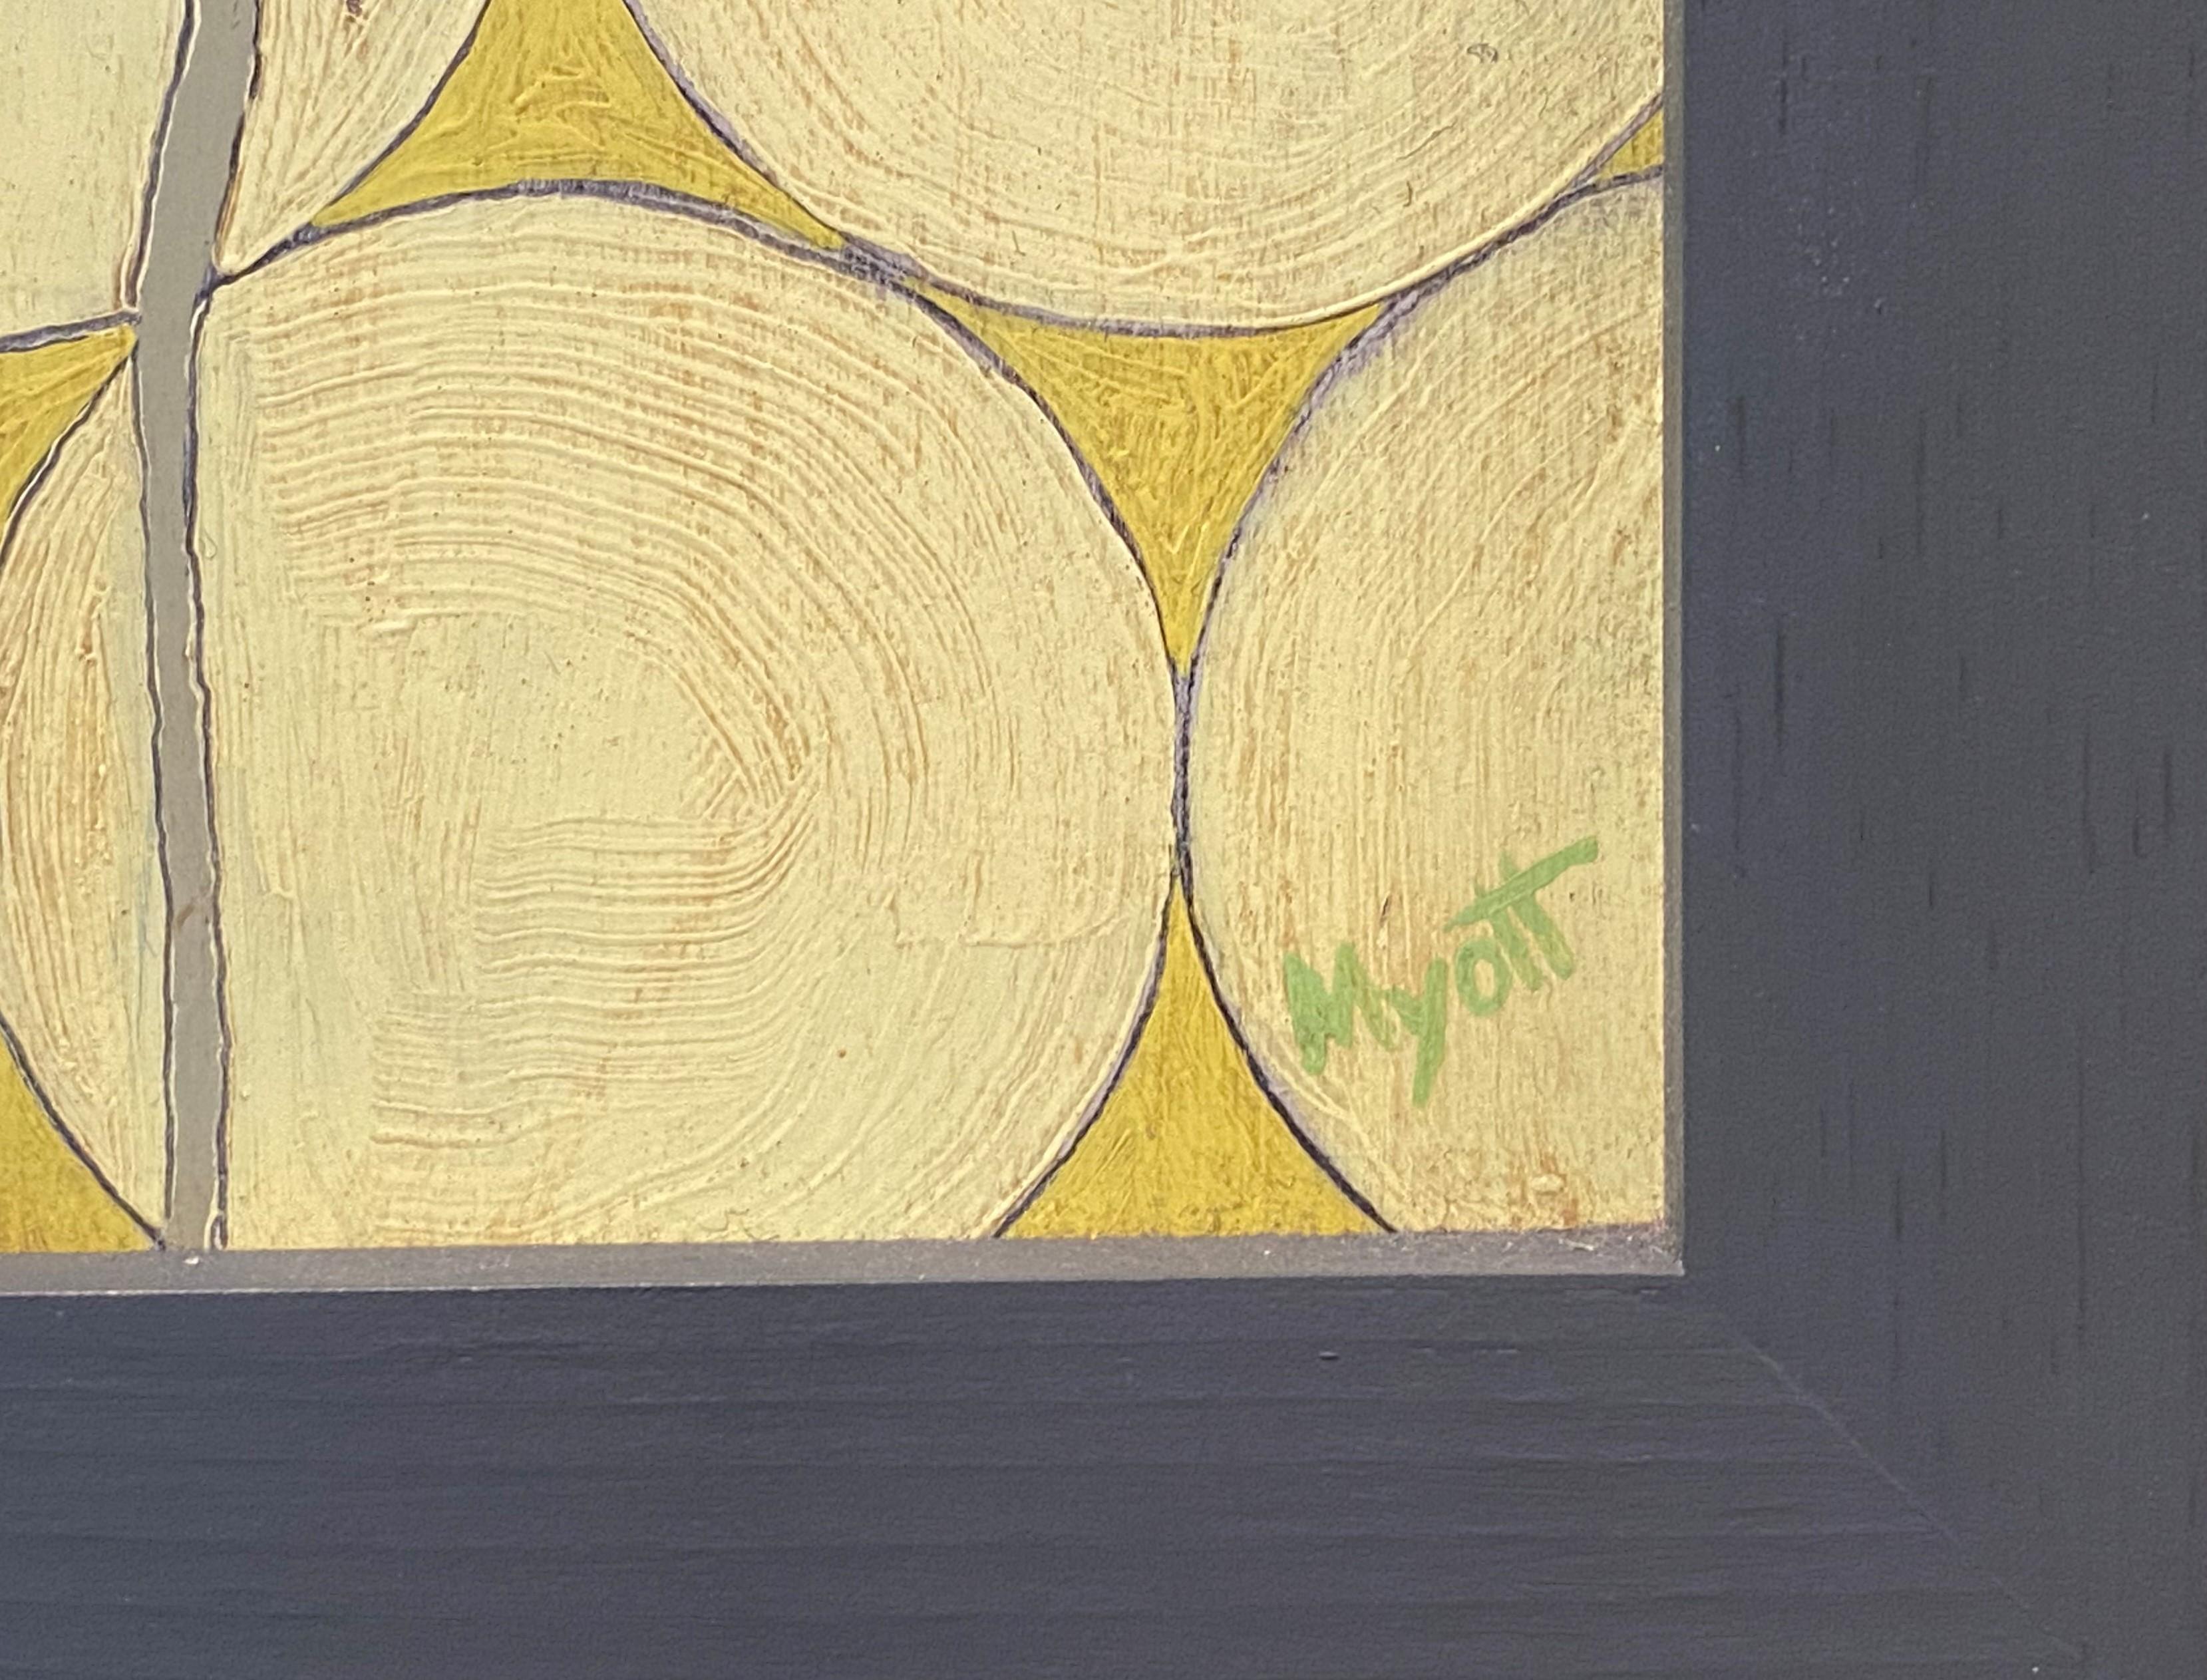 A fine modernist abstract still life oil painting of dandelions by contemporary New Hampshire artist Christopher Myott (1982-). In 2005, Chris Myott received a BS in studio arts at Chester College, located near Manchester, NH, and he spent two years